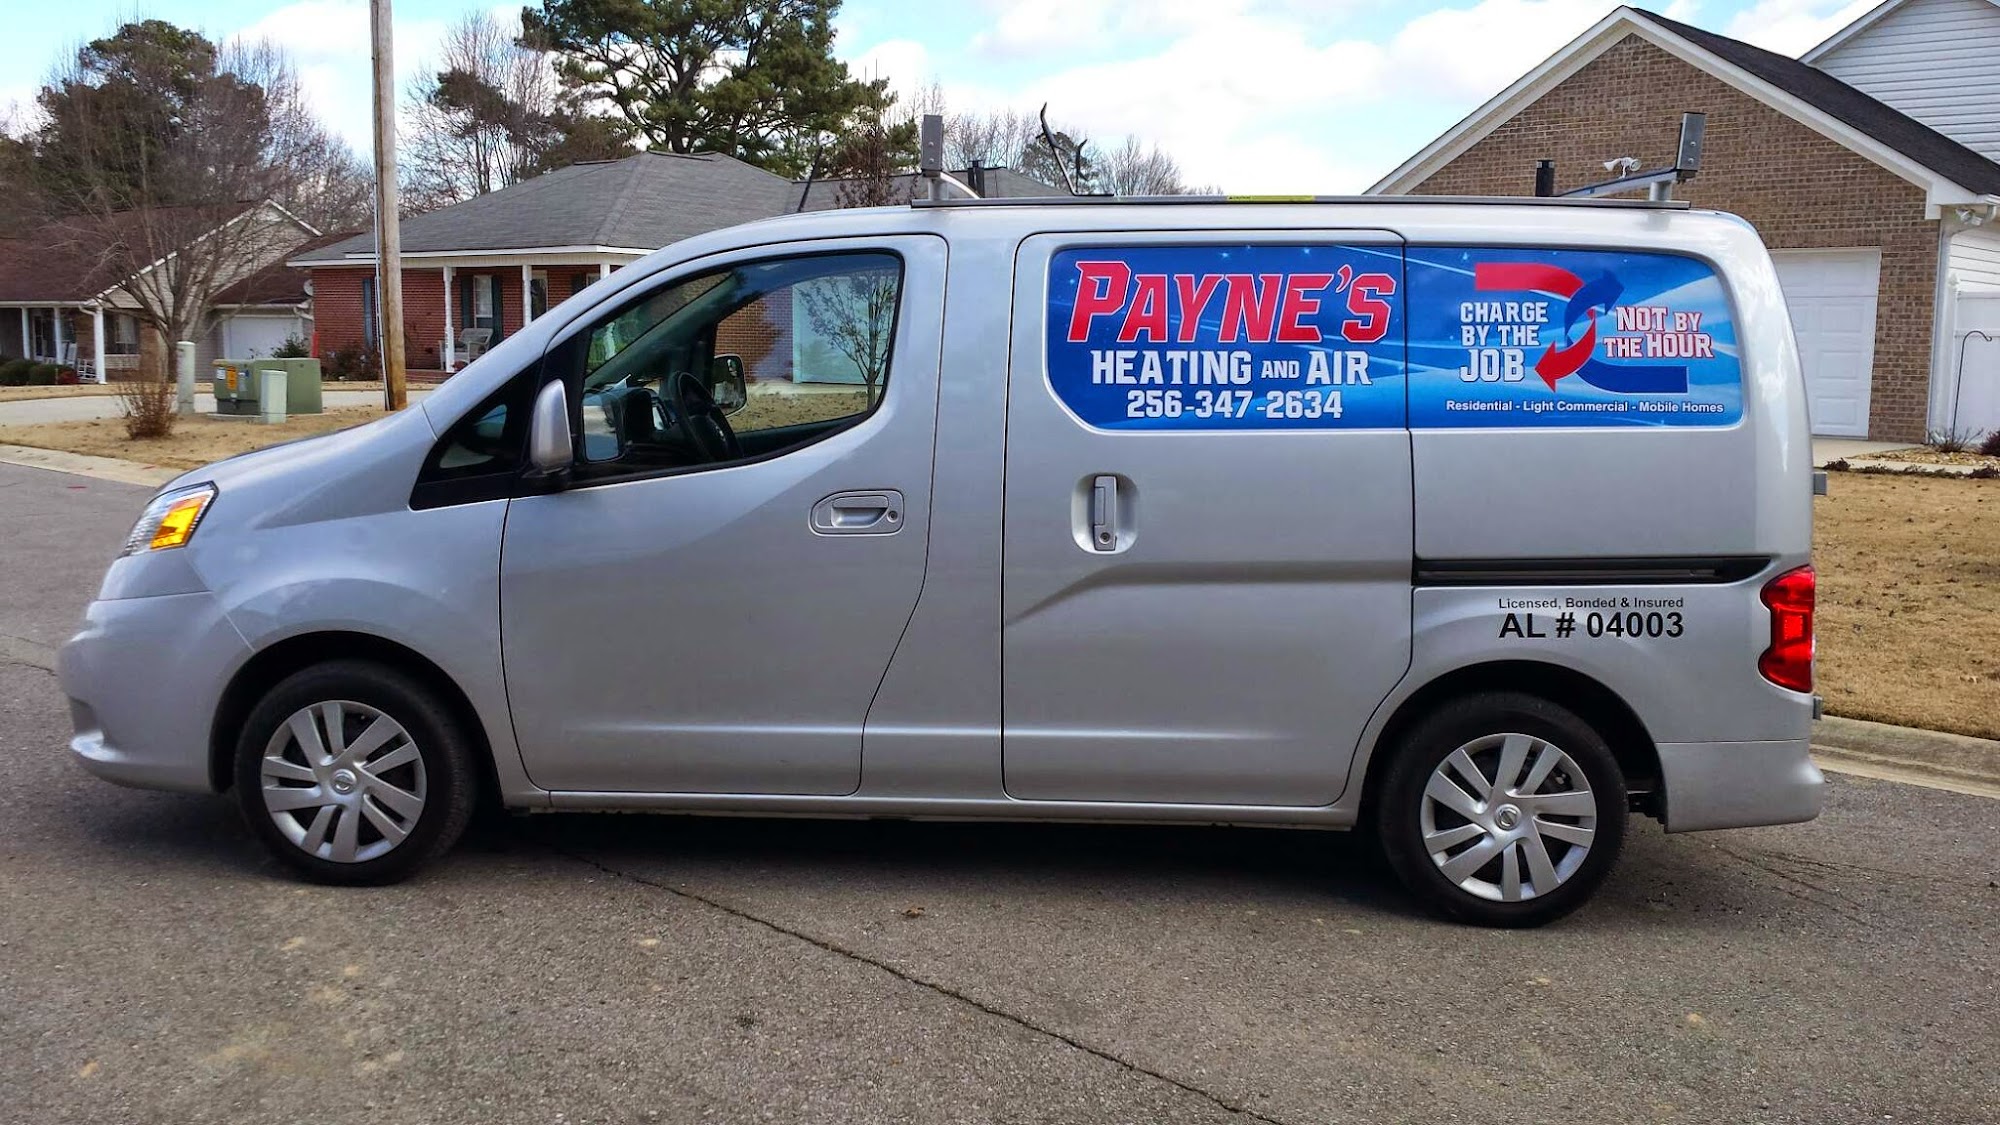 Payne's Heating & Air Conditioning Services